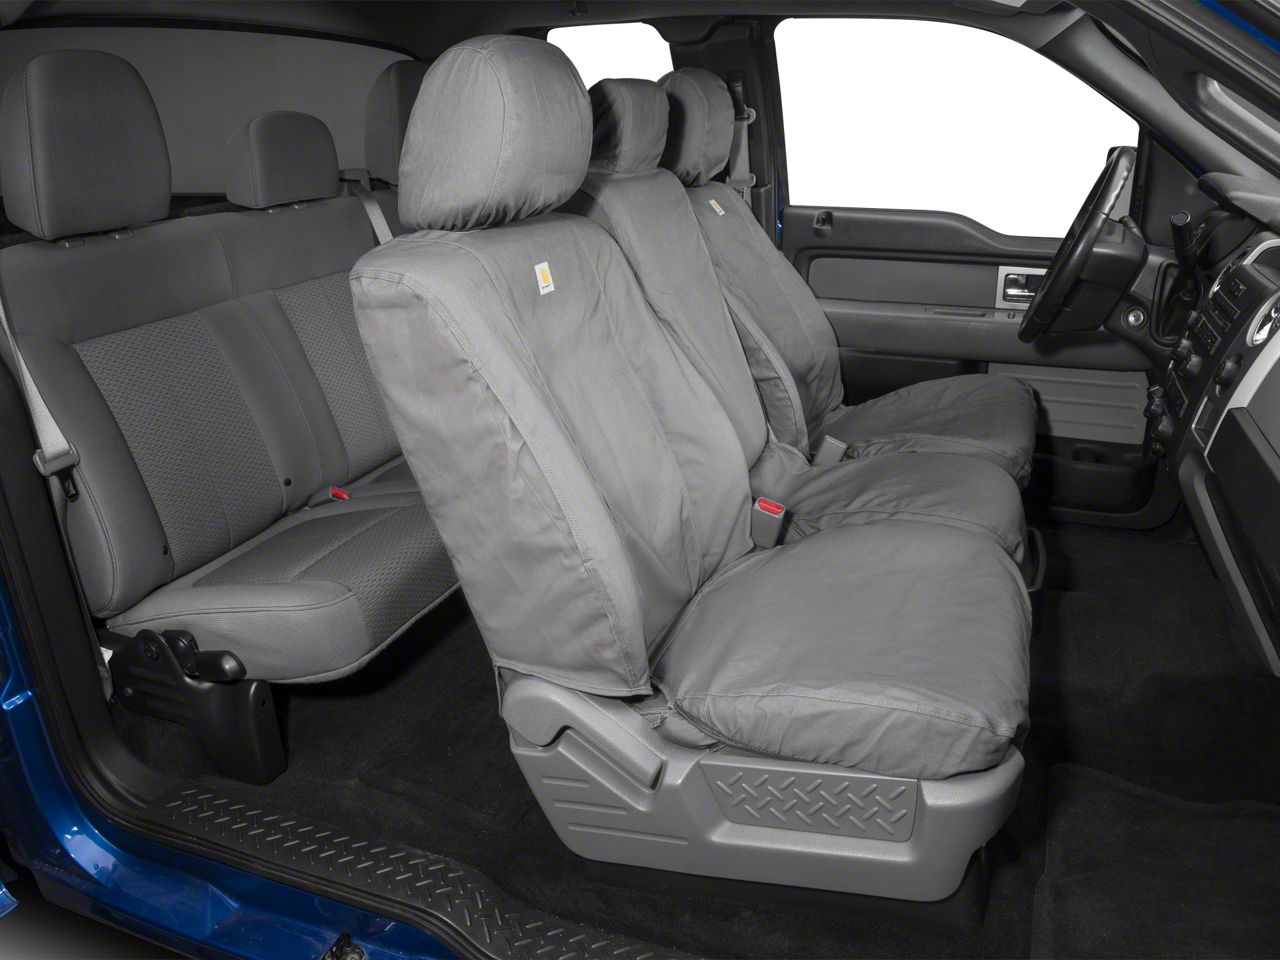 How To Install Covercraft Carhartt Seat Saver Front Cover Gravel 11 14 W Bench On Your Ford F 150 Americantrucks - 08 Silverado Carhartt Seat Covers